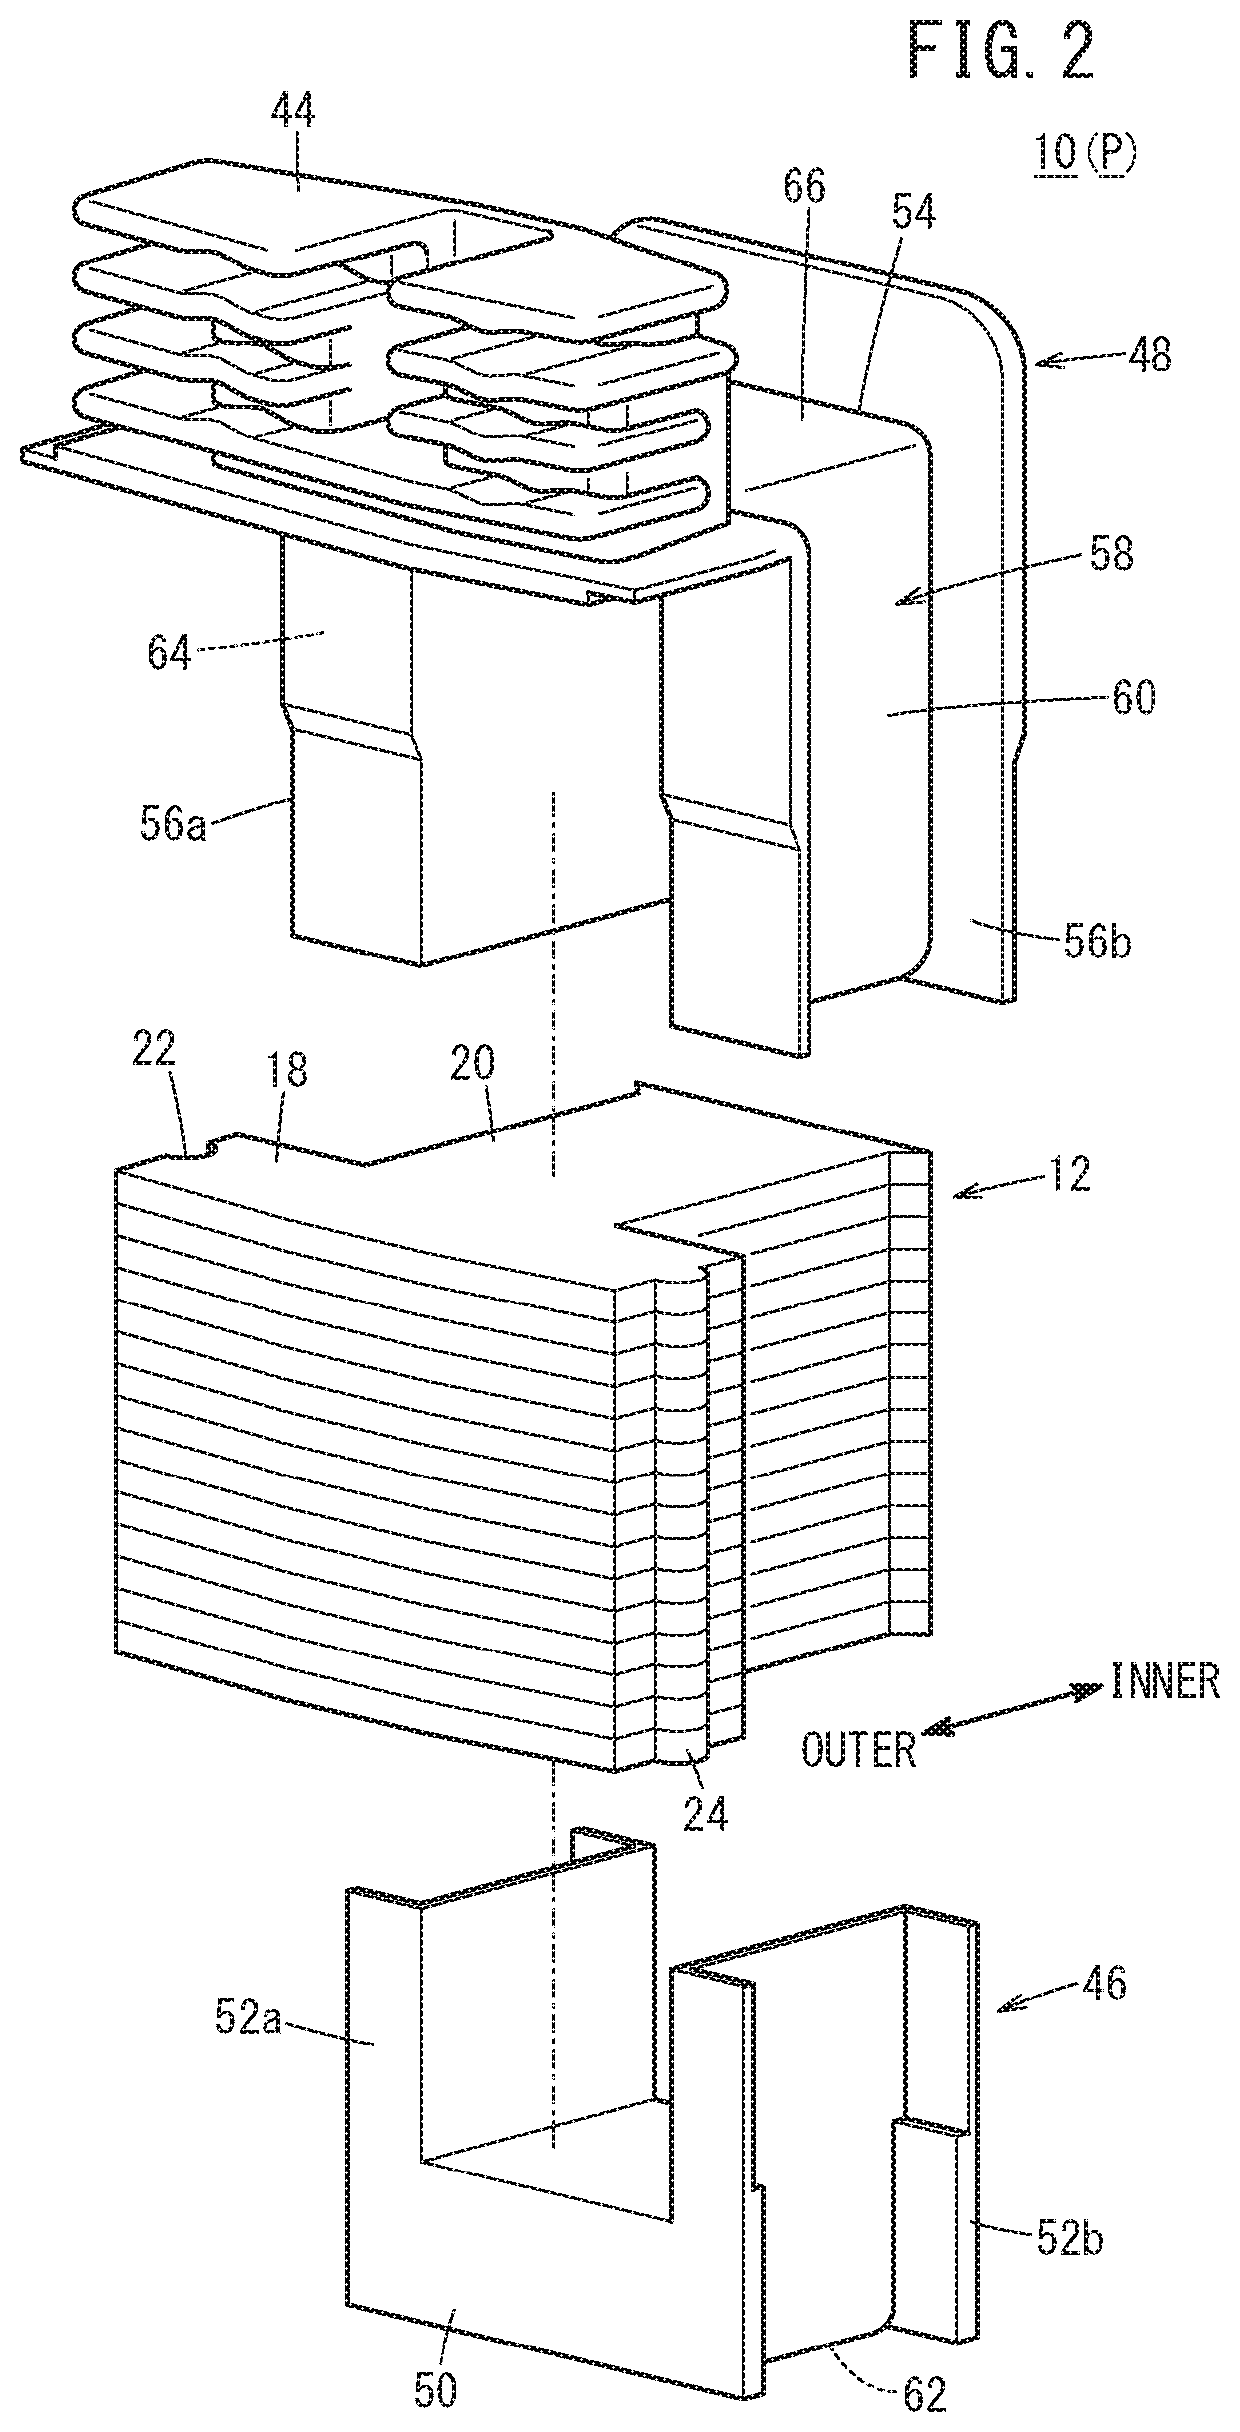 Method of manufacturing divided cores for a stator